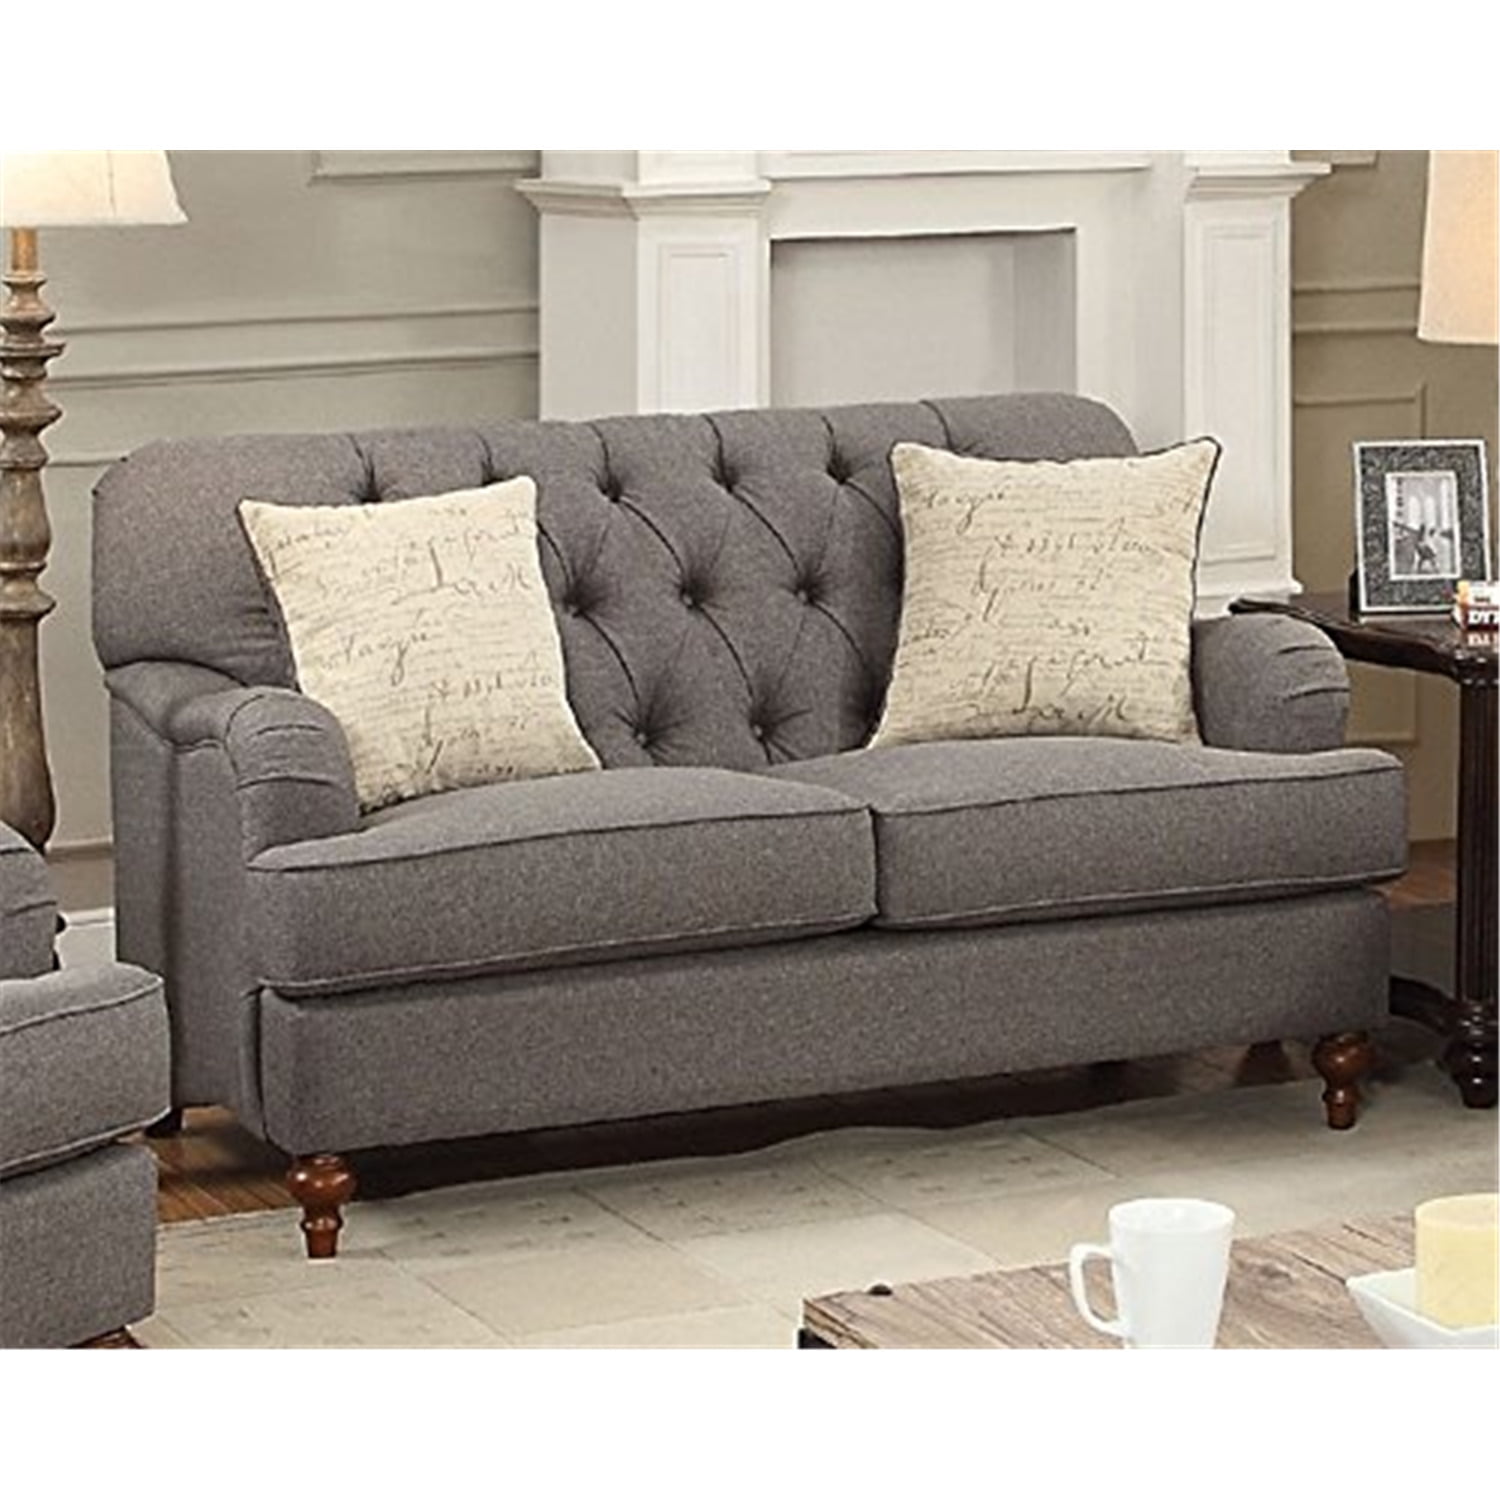 Picture of ACME 53691 Alianza Loveseat with 2 Pillows - Dark Gray Fabric - 37 x 61 x 38 in.